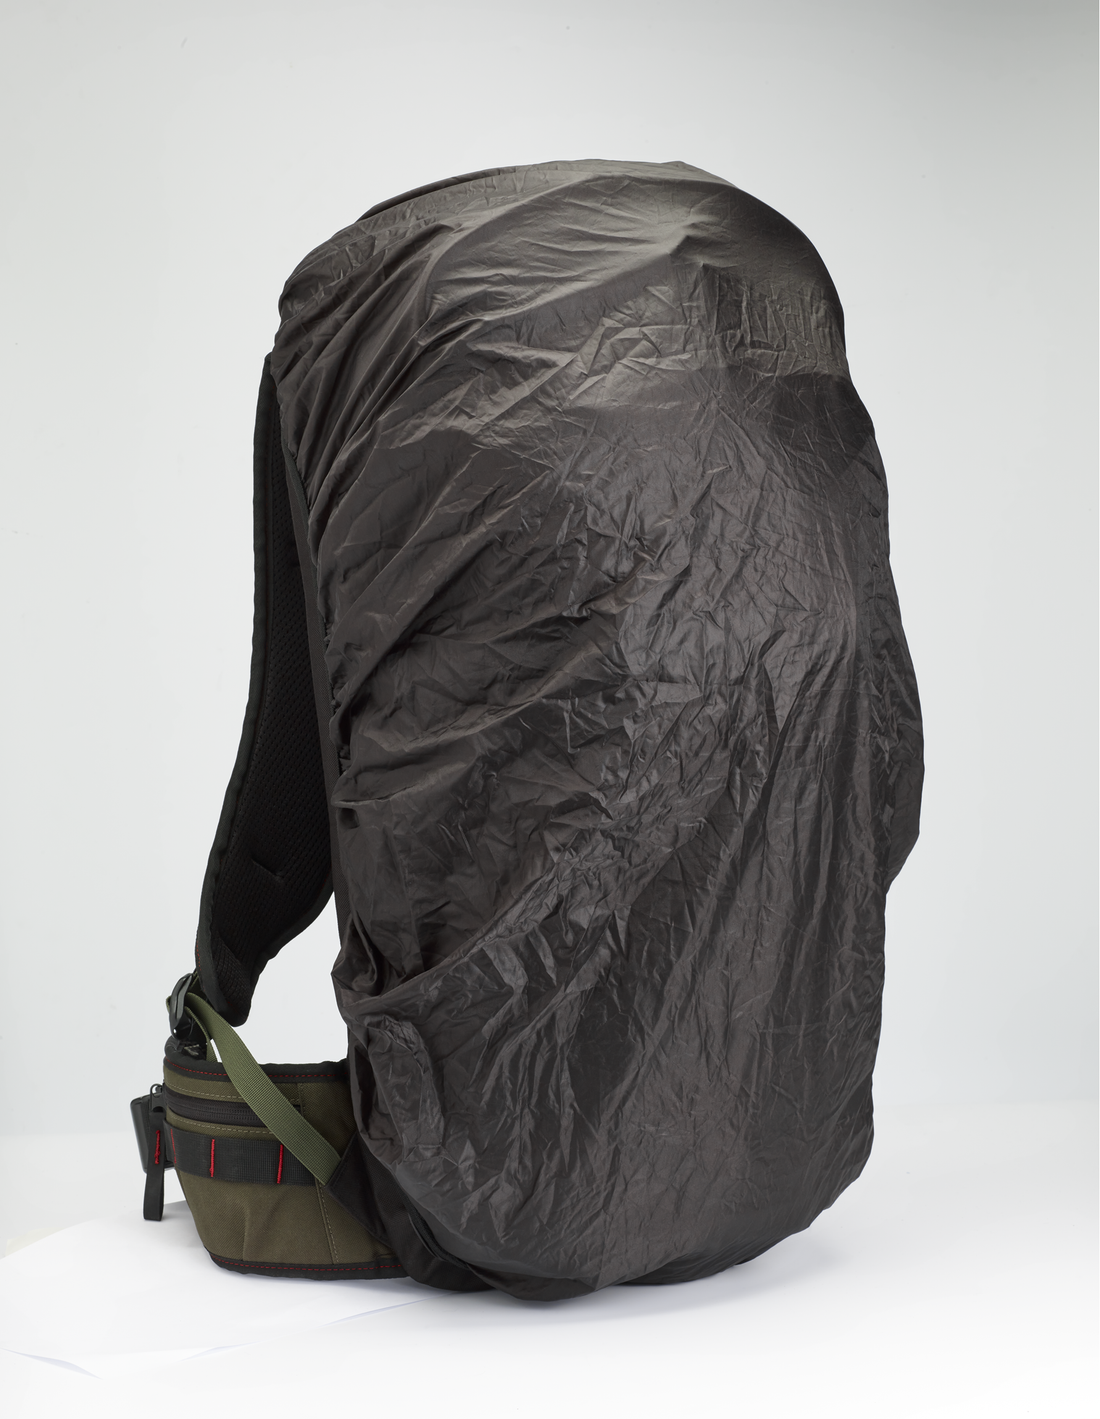 XP Metal Detector Backpack 280 shown with rain cover